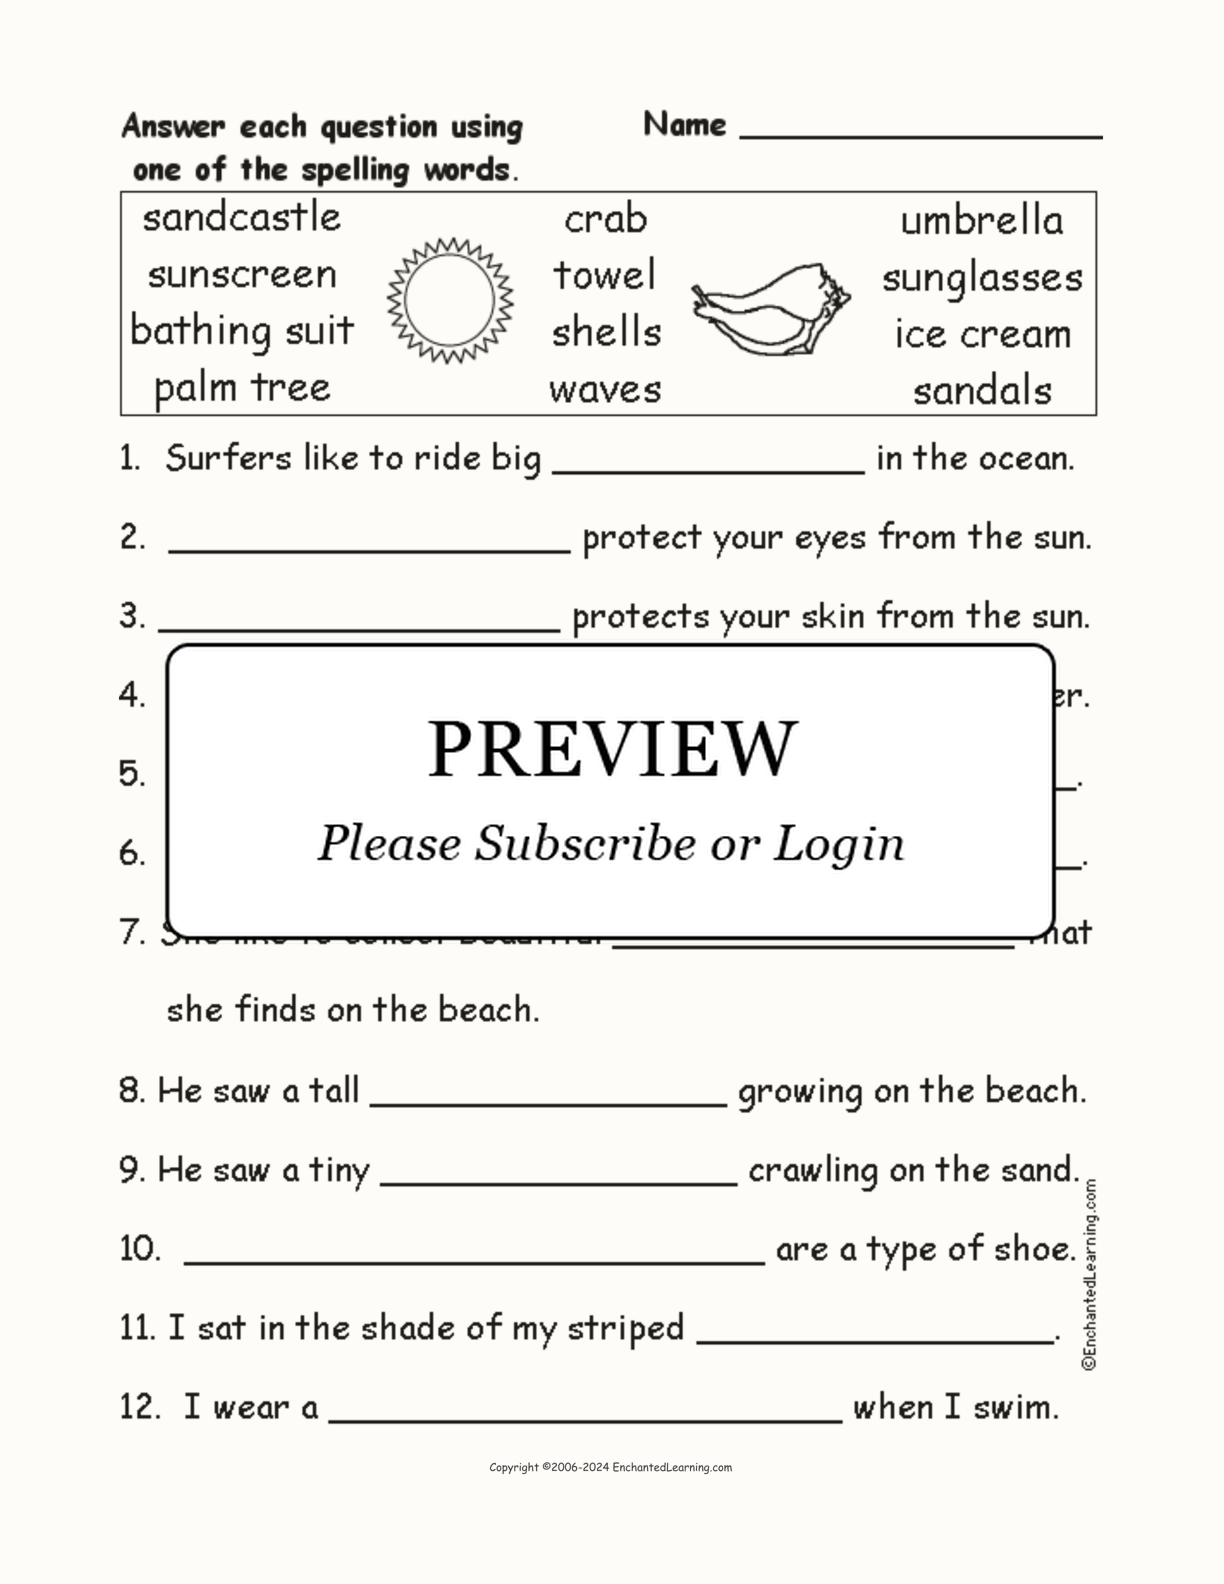 Beach Spelling Word Questions interactive worksheet page 1